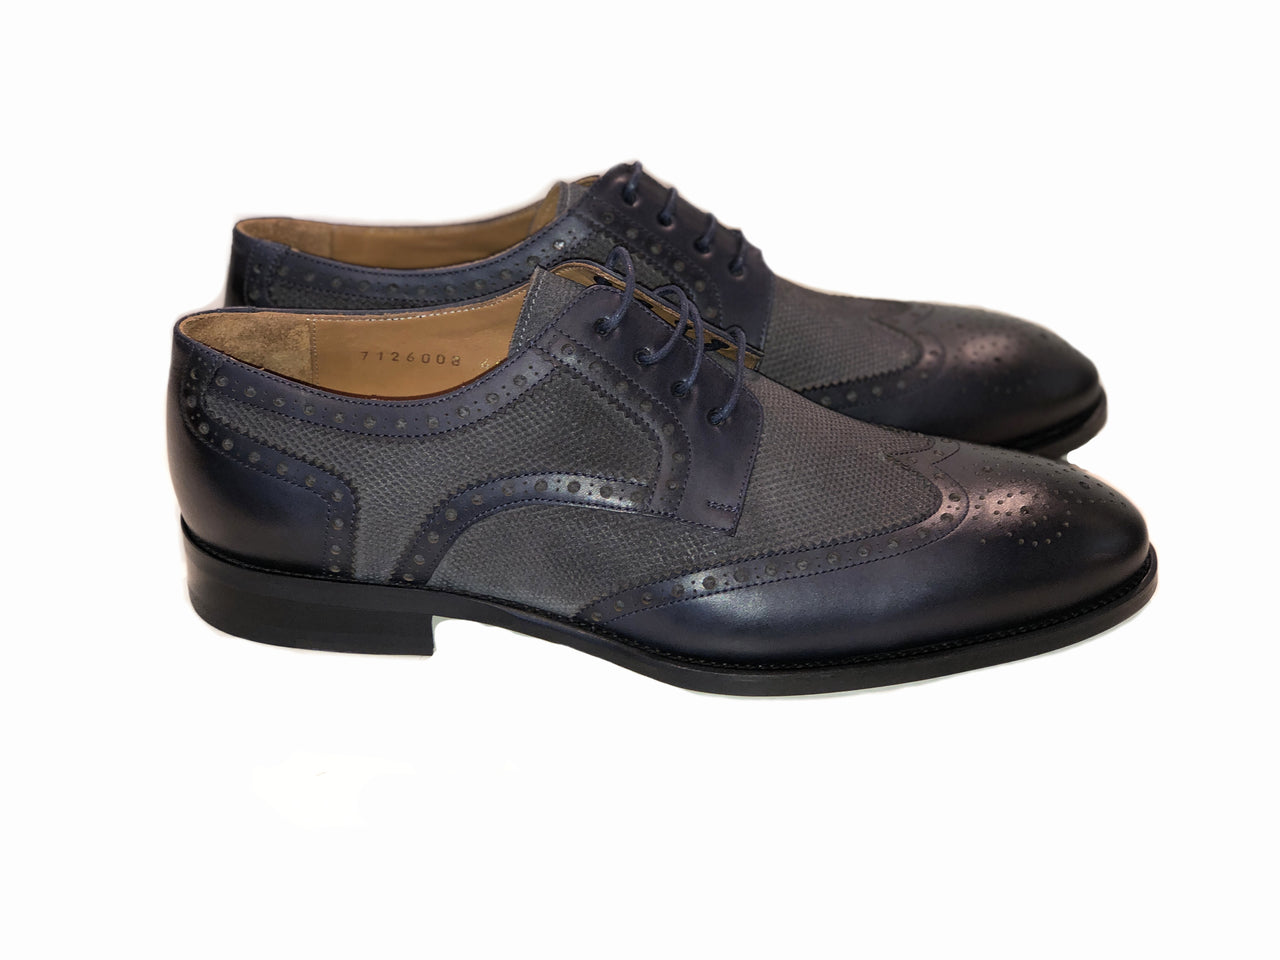 Pelle Line Exclusive 7126 Two Tone Spectator Wingtip Lace Up - Navy/Grey